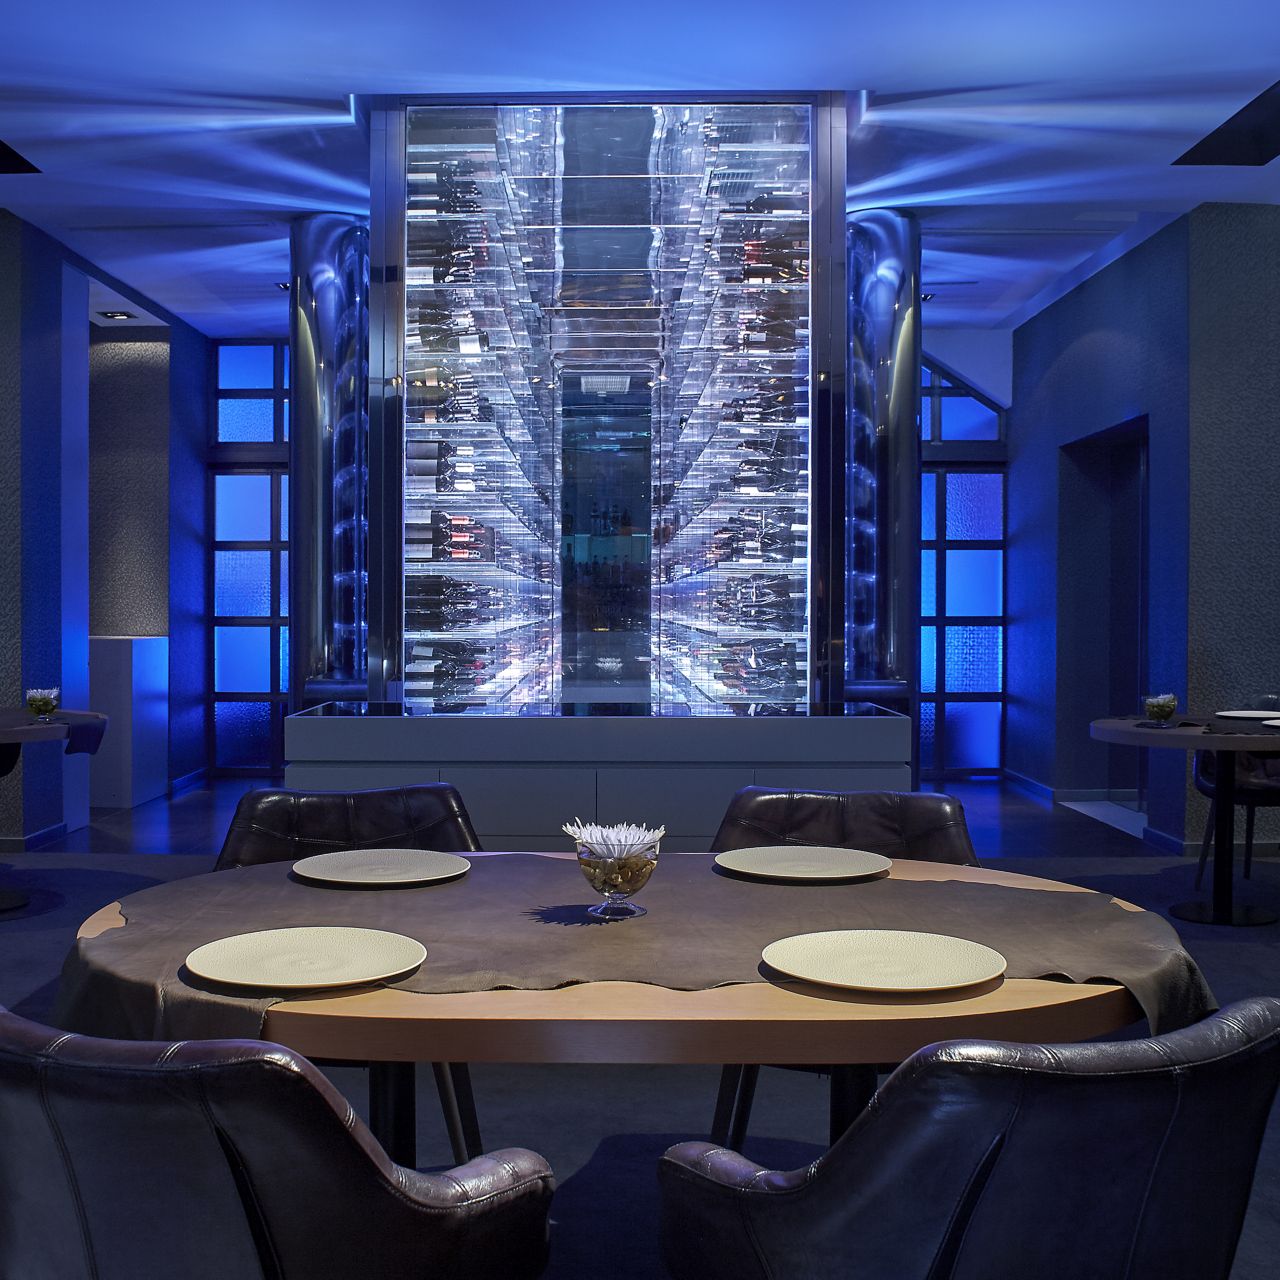 A dining table in front of a large glass wine closet backlit for the evening